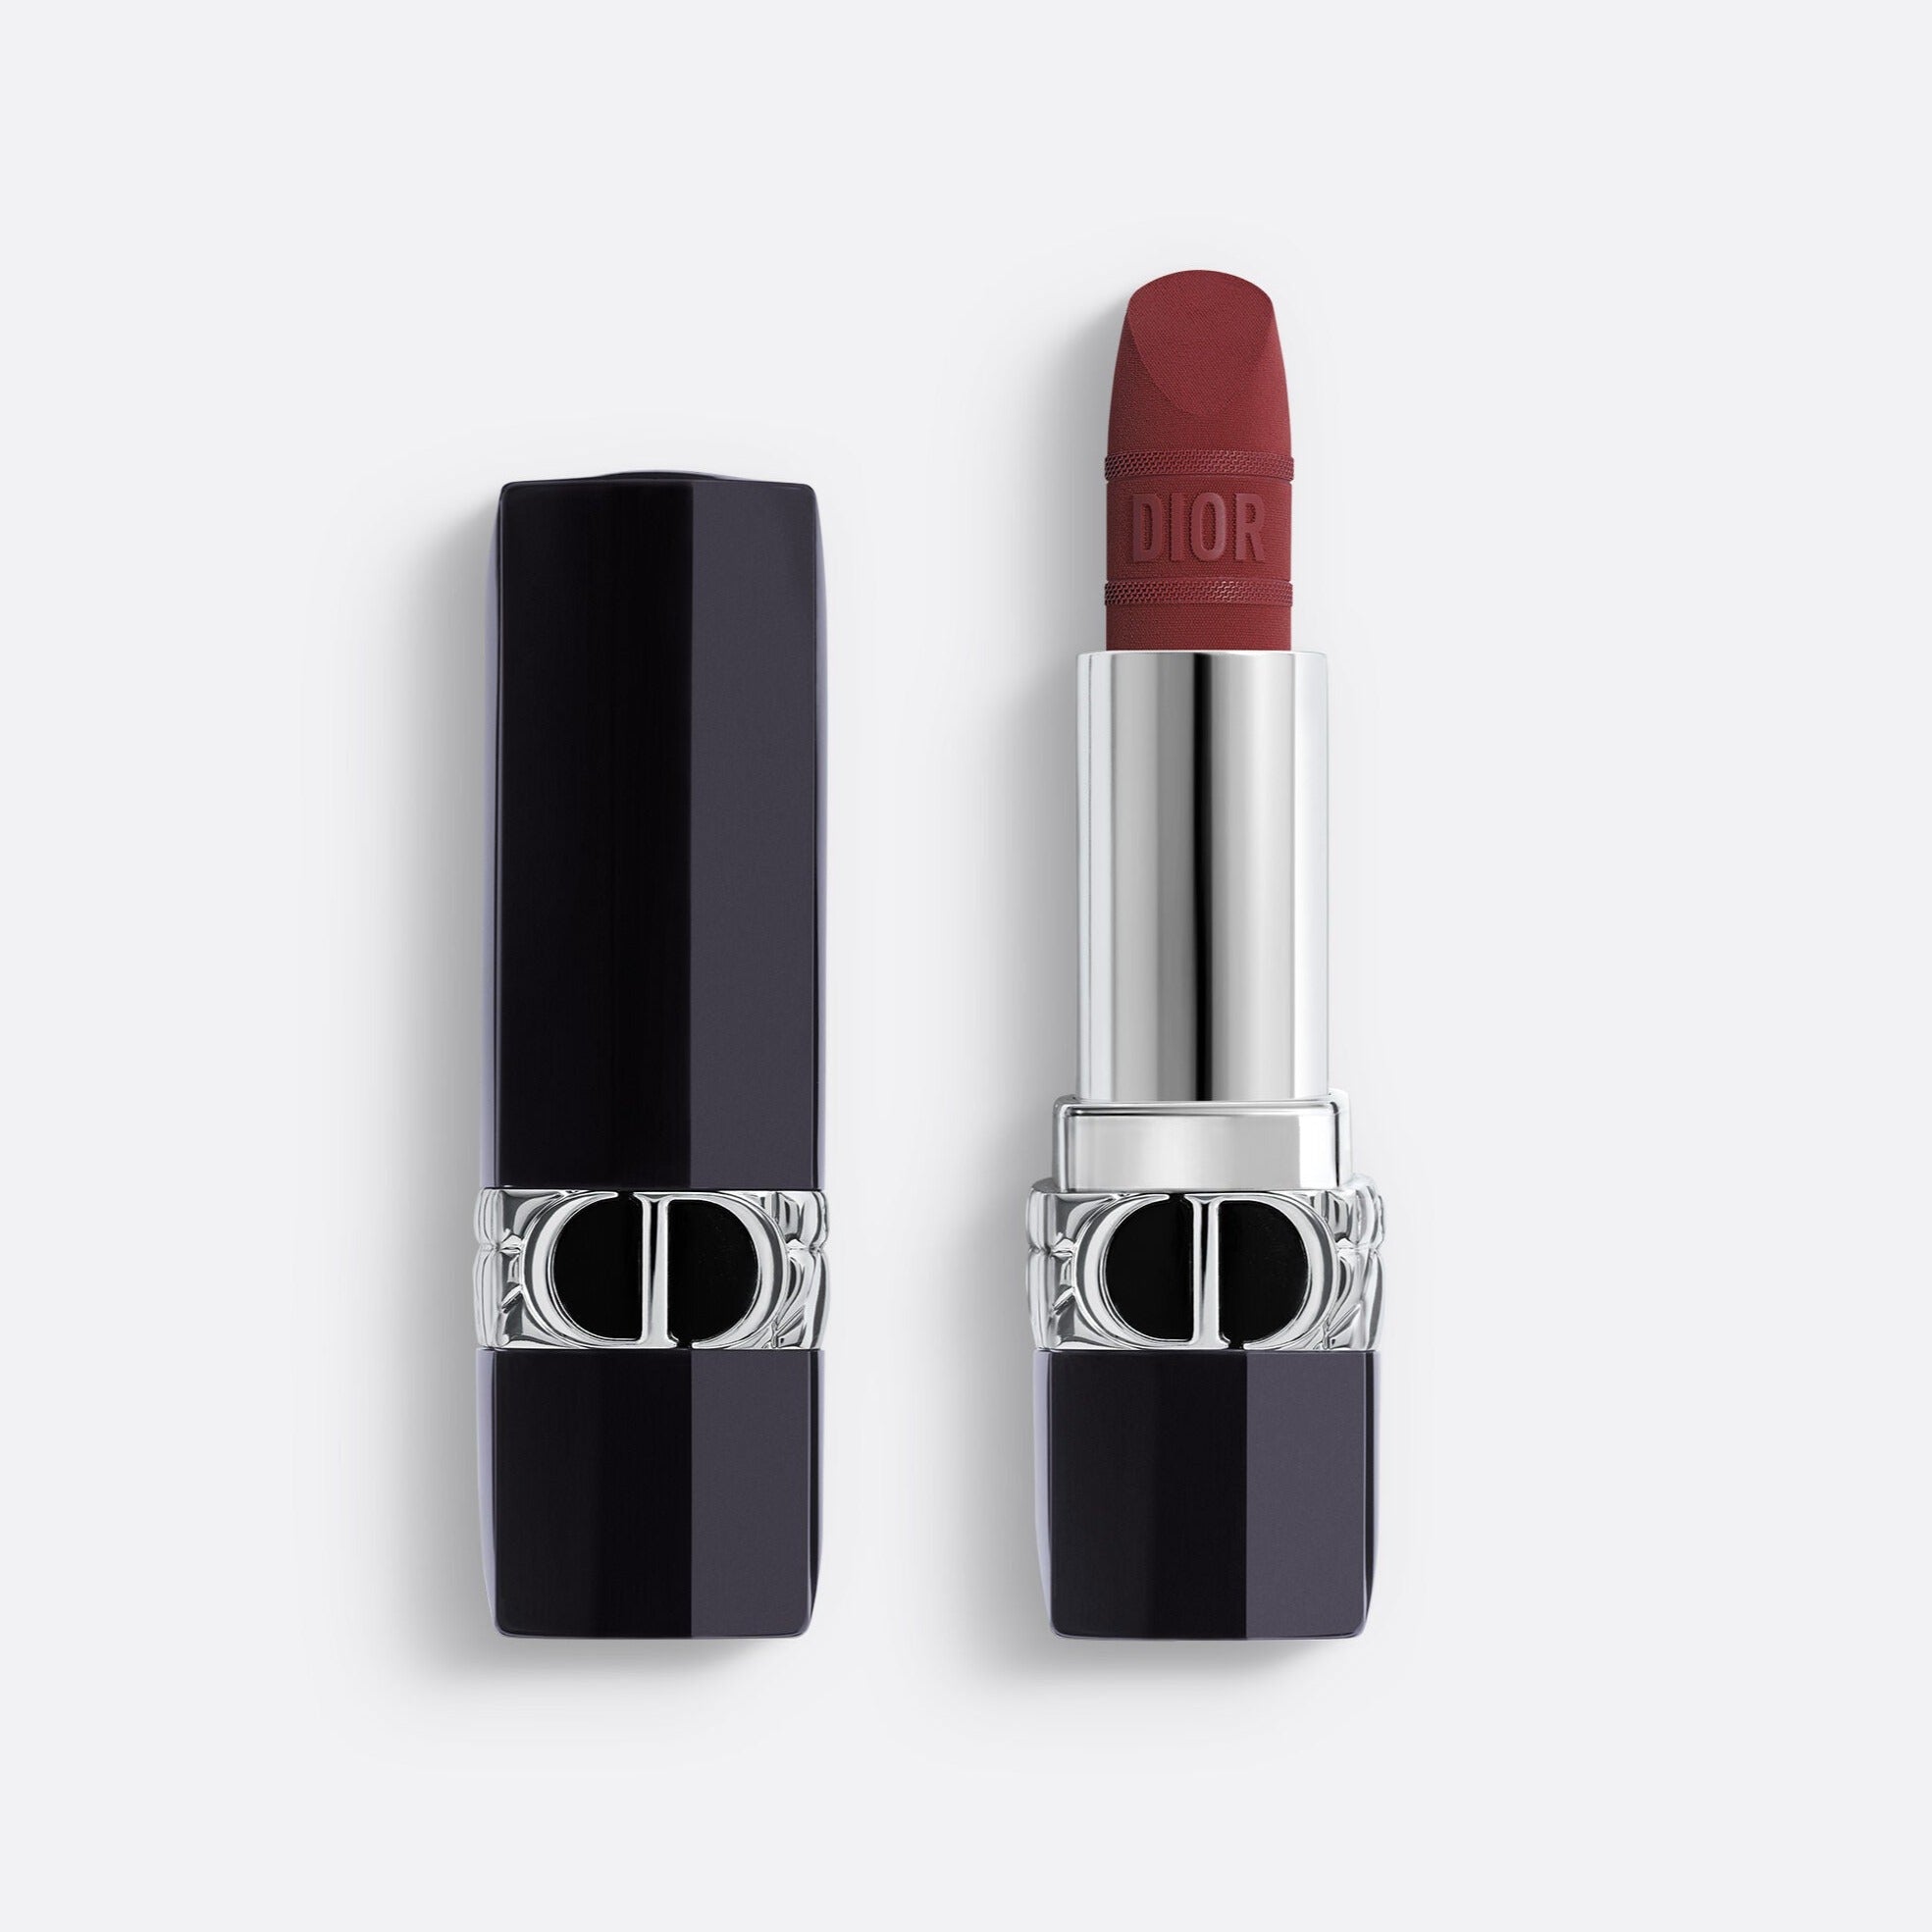 Rouge Dior Ultra Care Lipstick  Liquid Lipstick Review  Swatches   Reviews and Other Stuff